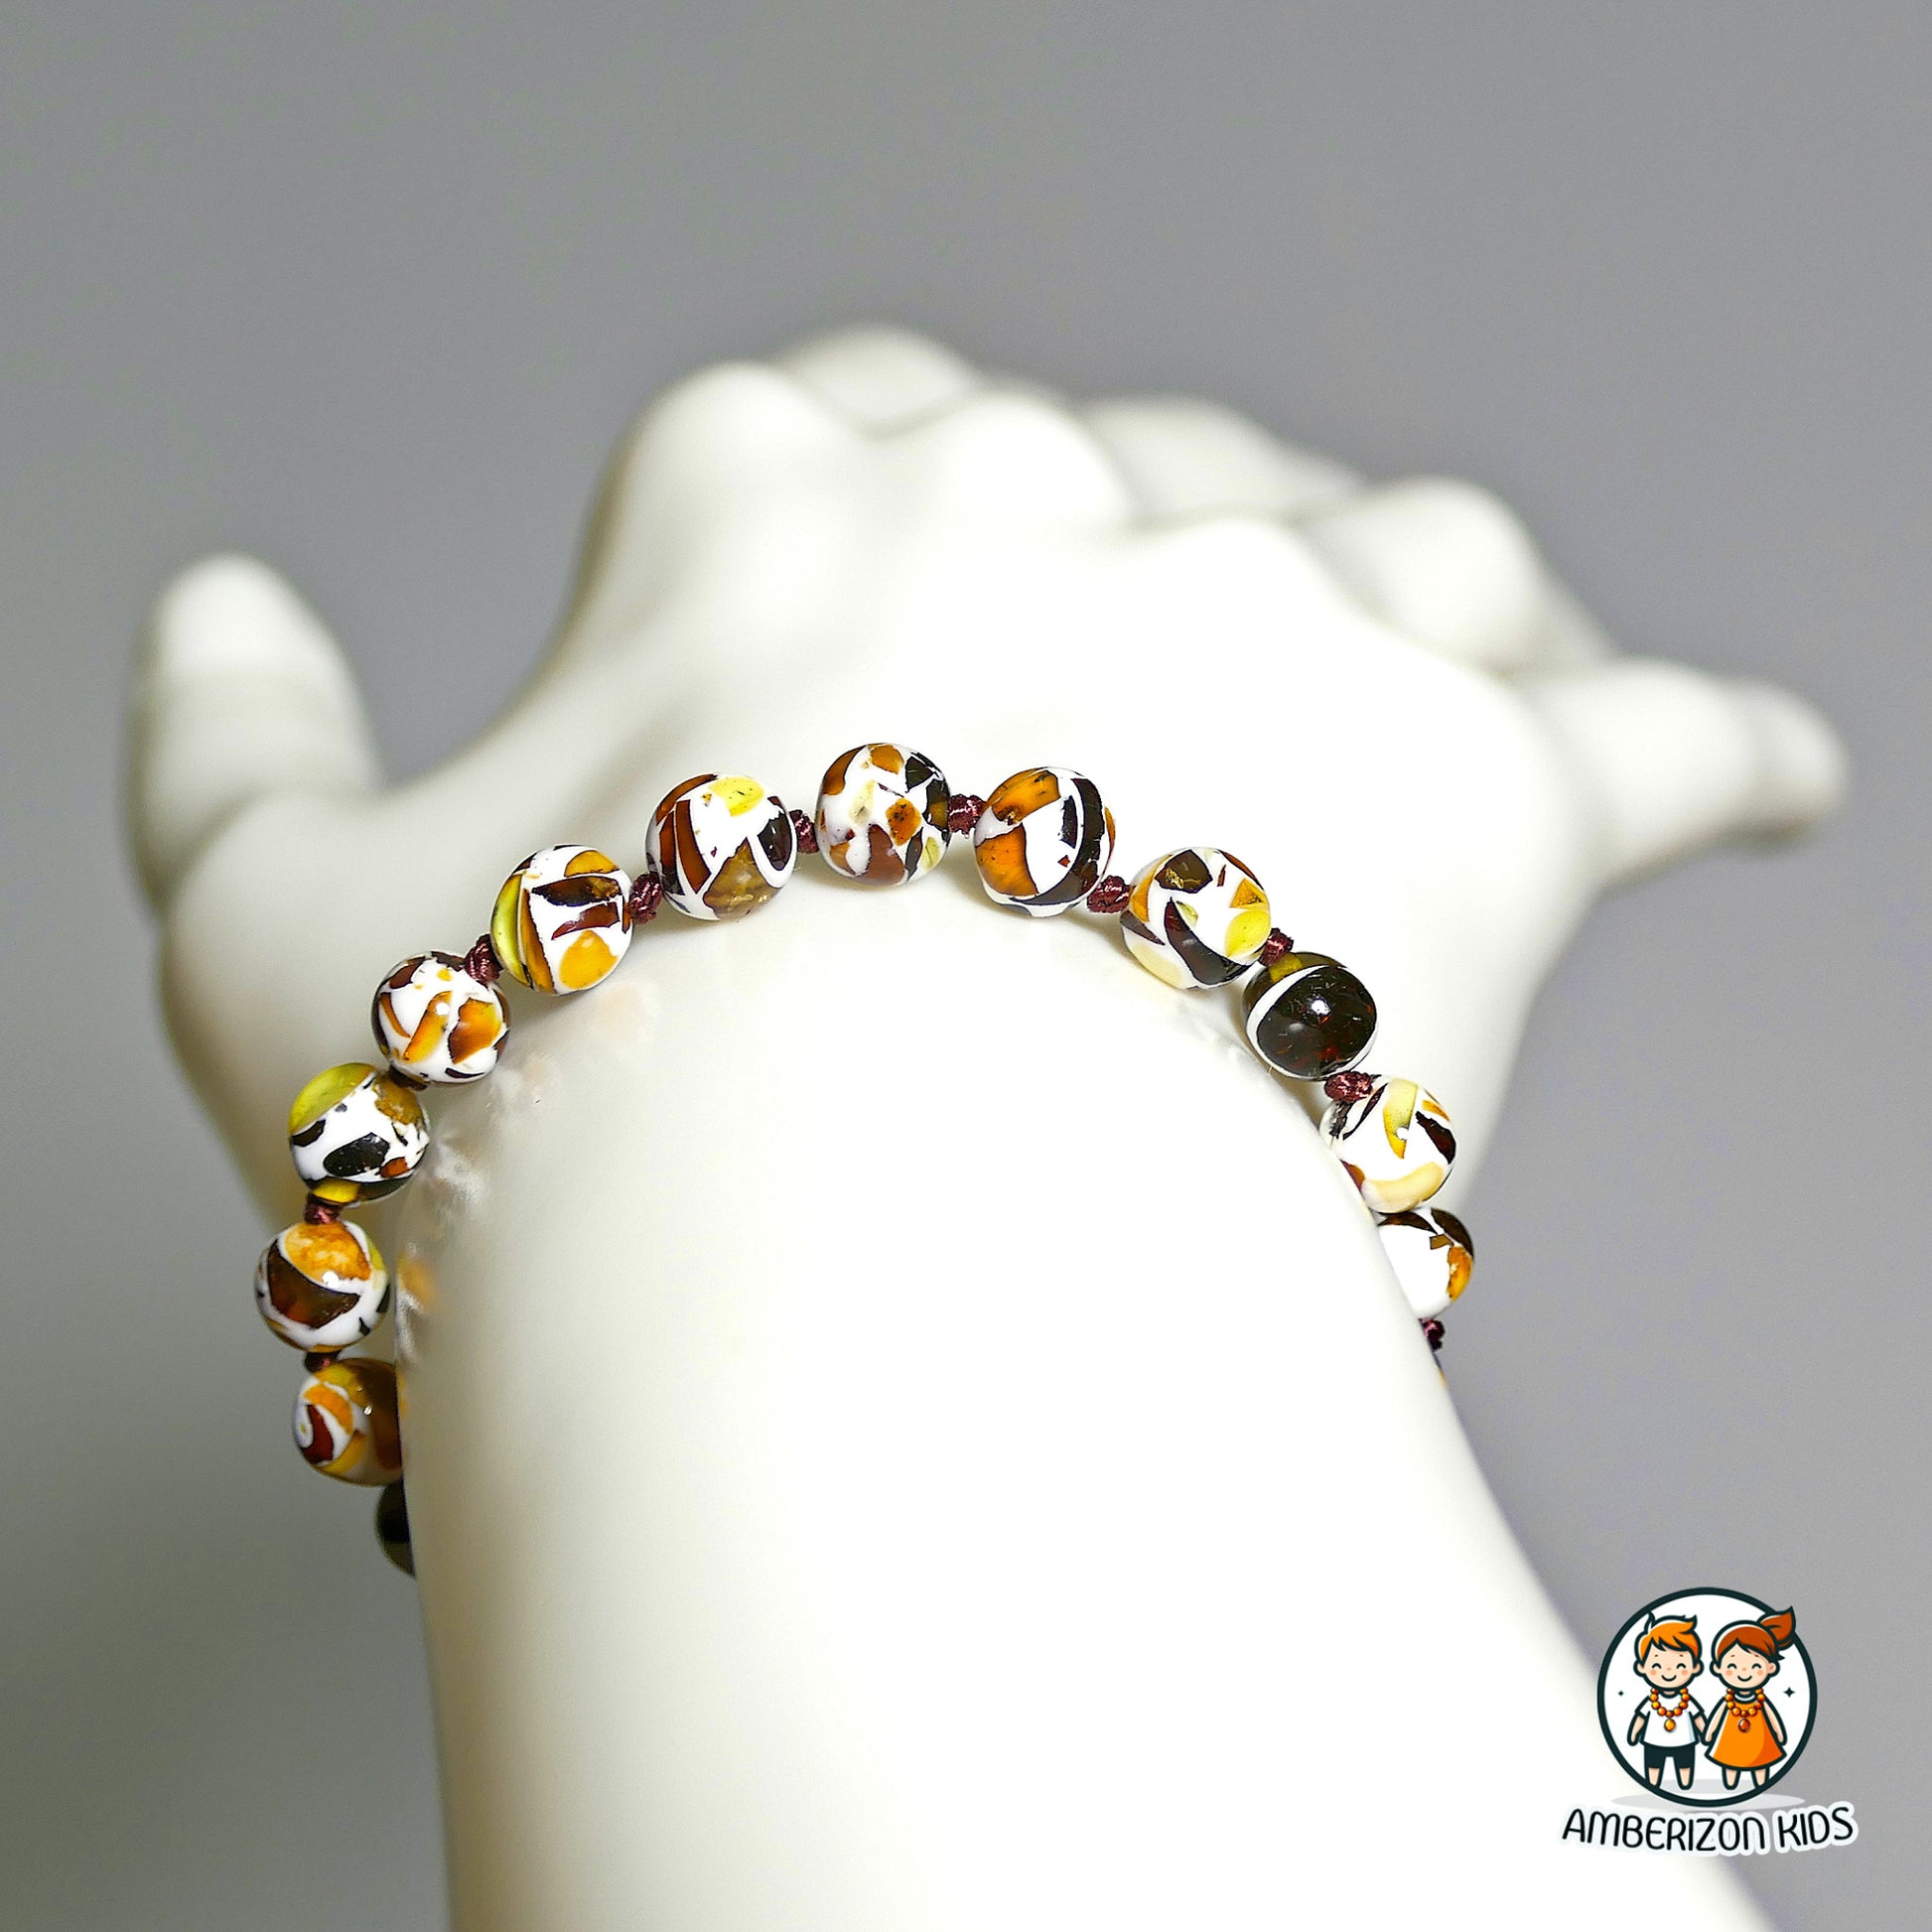 6-7mm beads - Mosaic amber baby bracelet - anklet - White resin with natural amber pieces